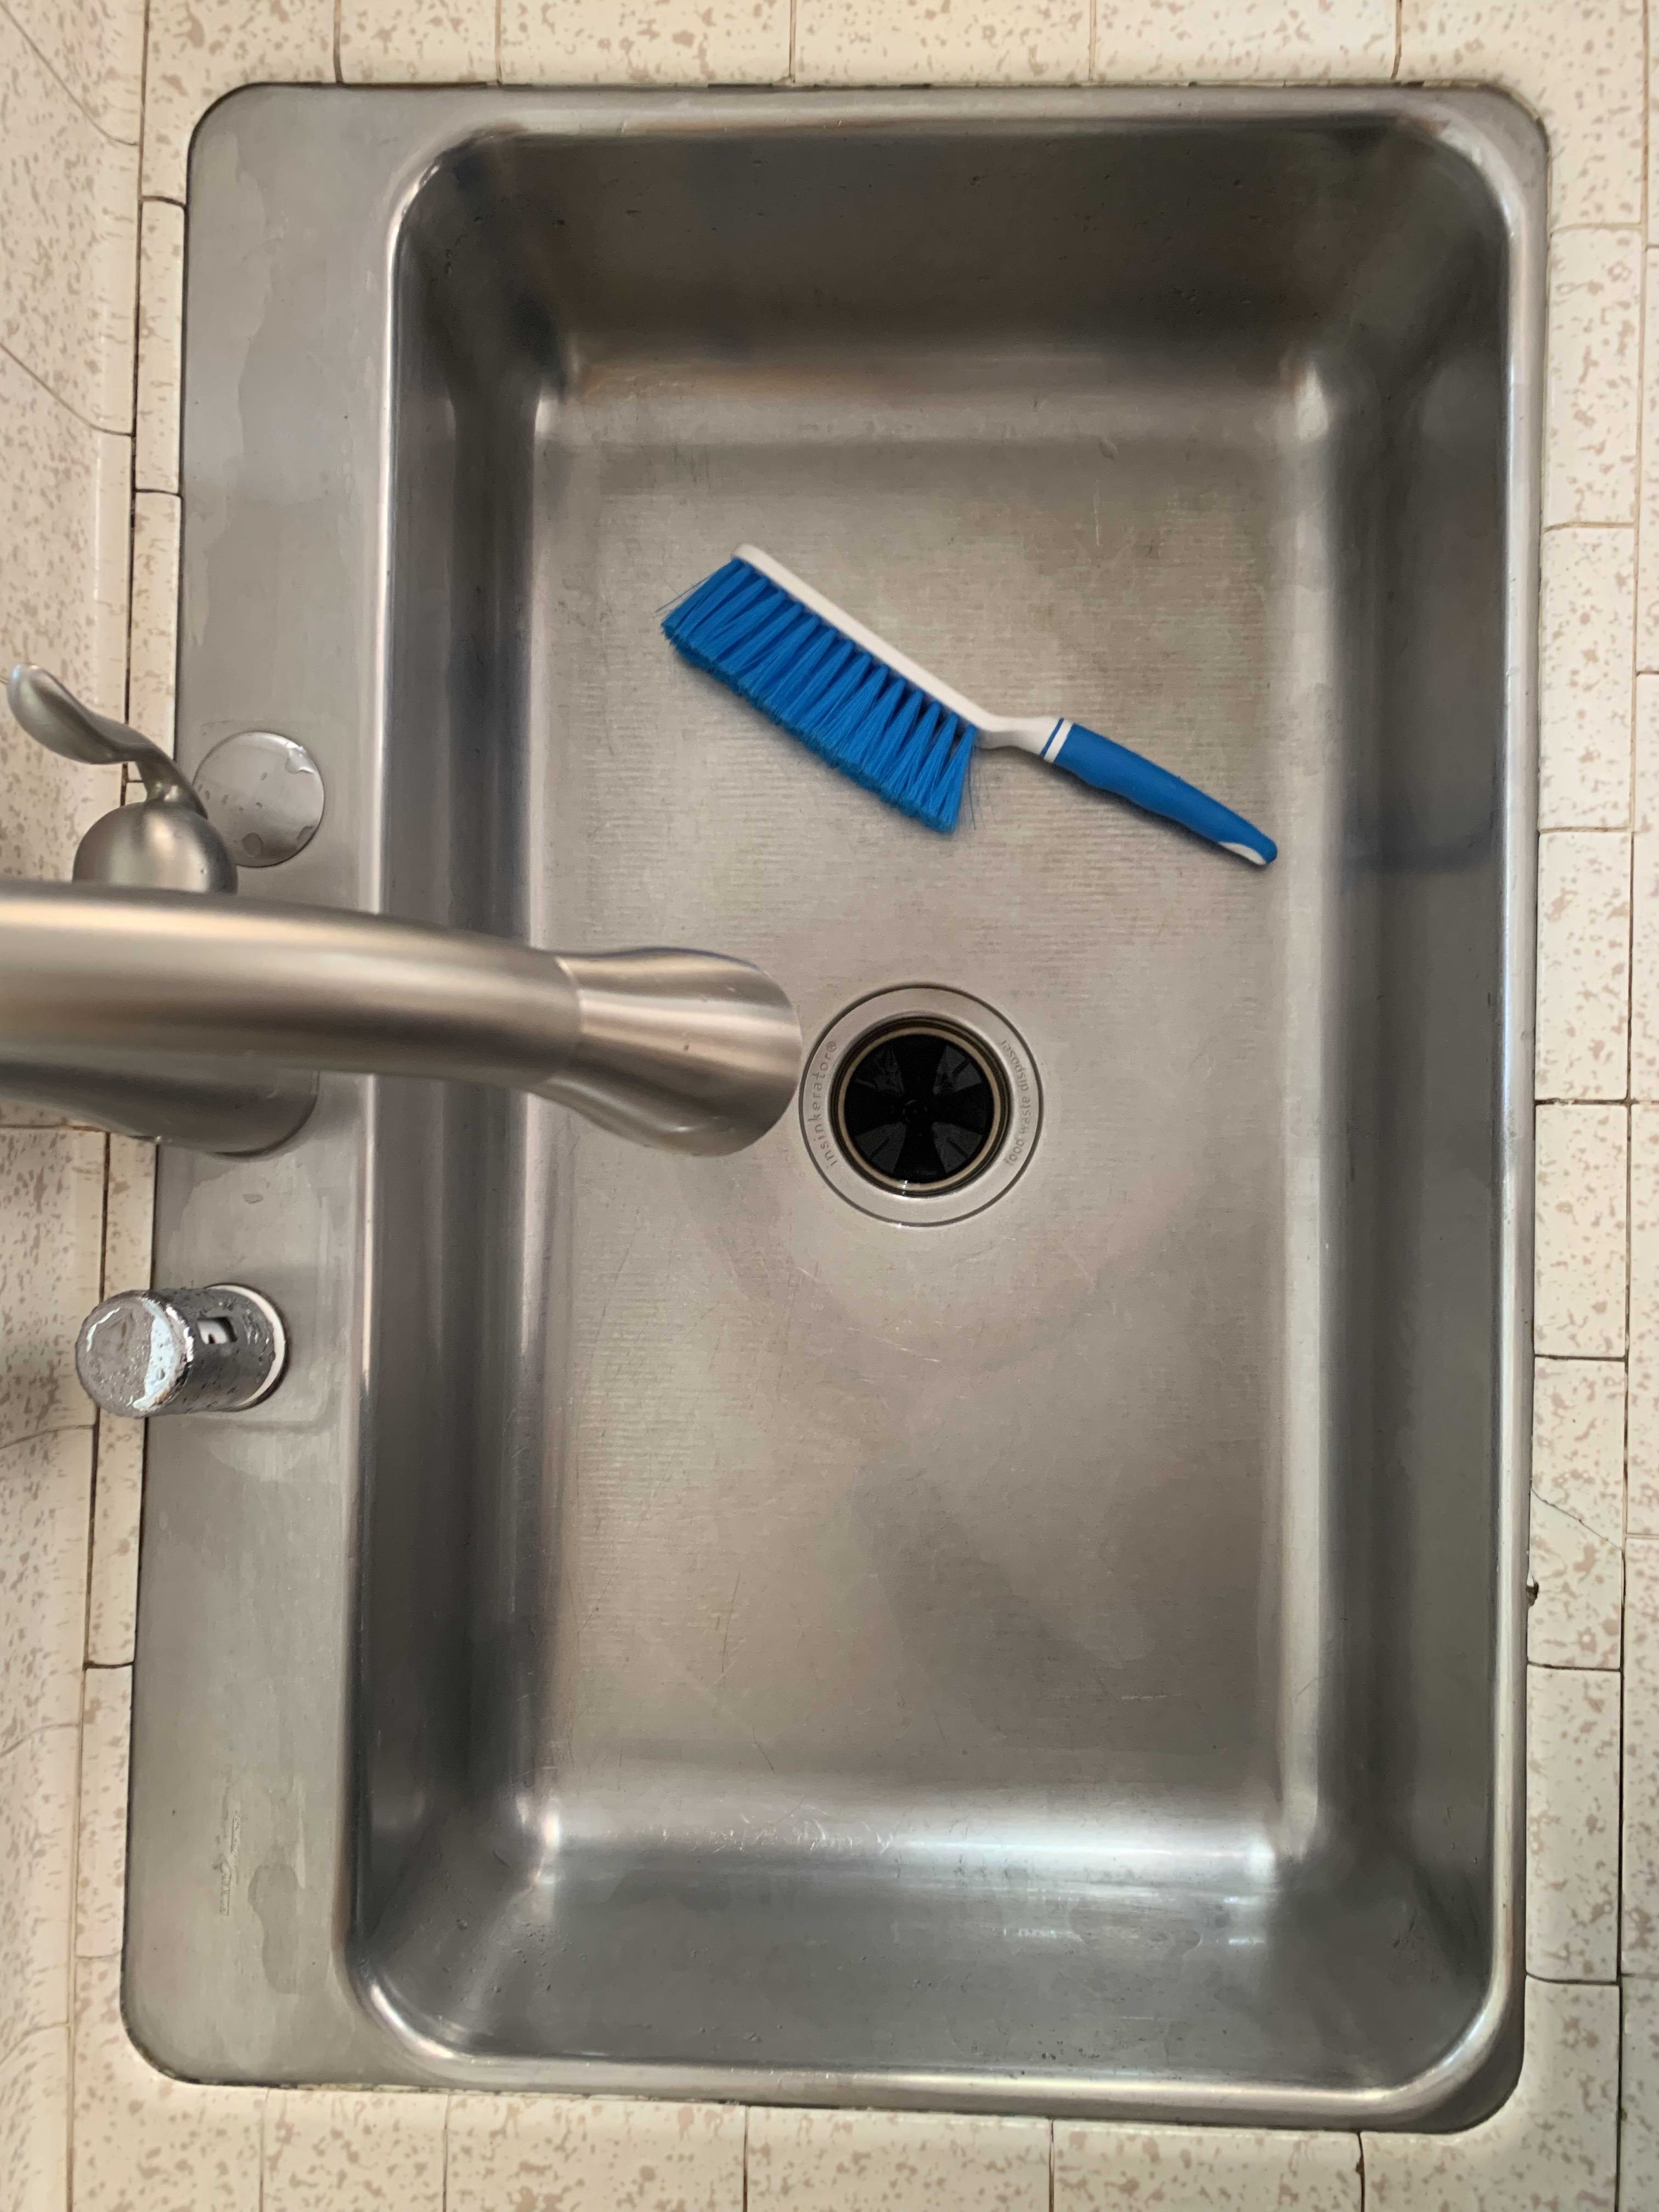 This Dollar Tree Brush Is Great for Cleaning Your Kitchen Sink